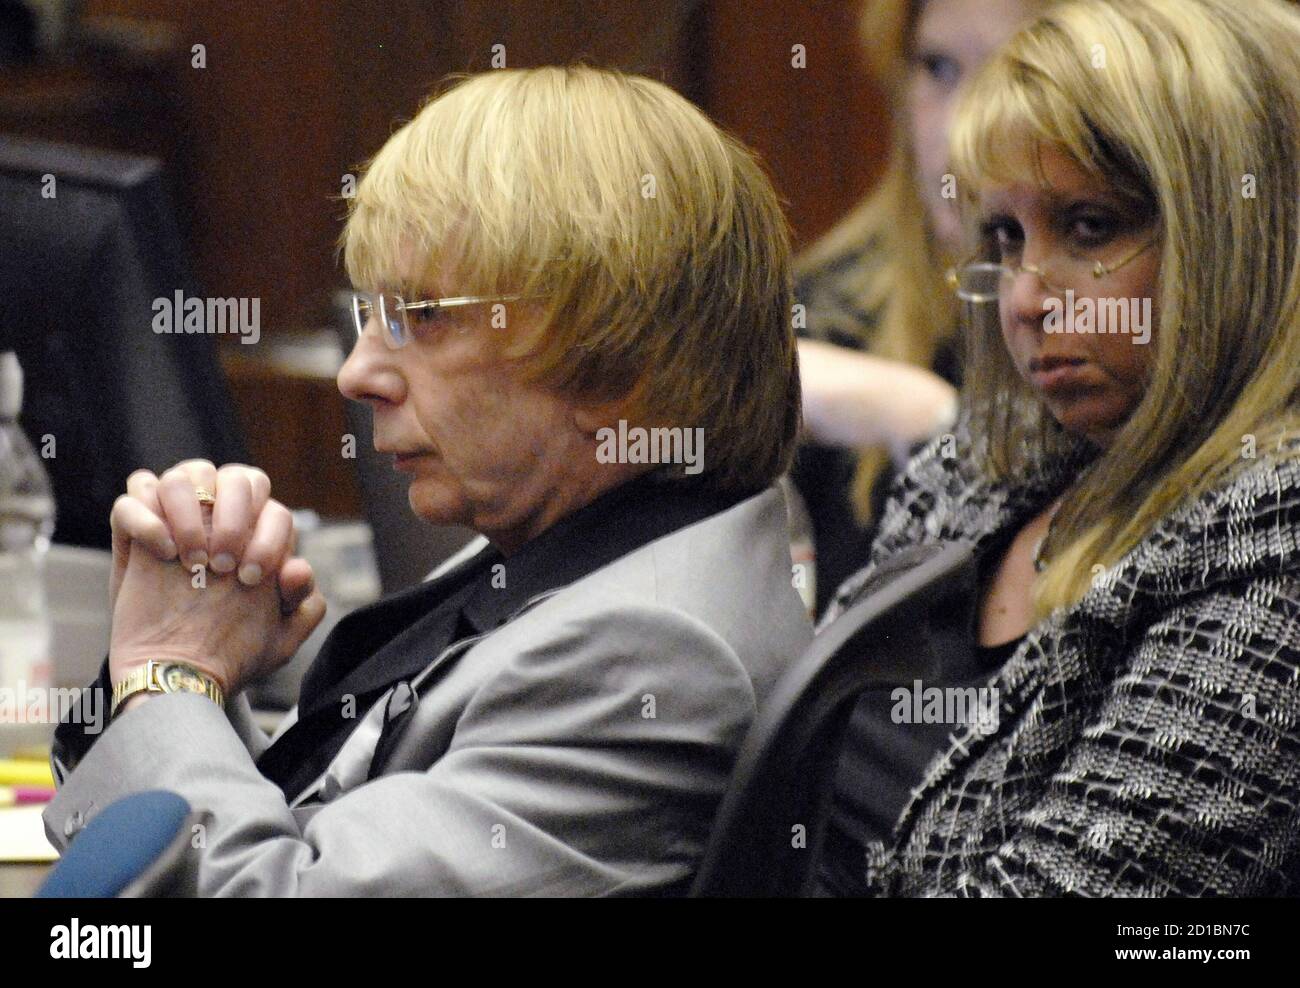 Music producer Phil Spector (L) sits next to defense attorney Linda Kenny Baden as they listens to testimony during his murder trial in Los Angeles Superior Court in Los Angeles, California May 9, 2007. Spector is accused of killing actress Lana Clarkson in his home in 2003.   REUTERS/Jamie Rector/Pool   (UNITED STATES) Stock Photo